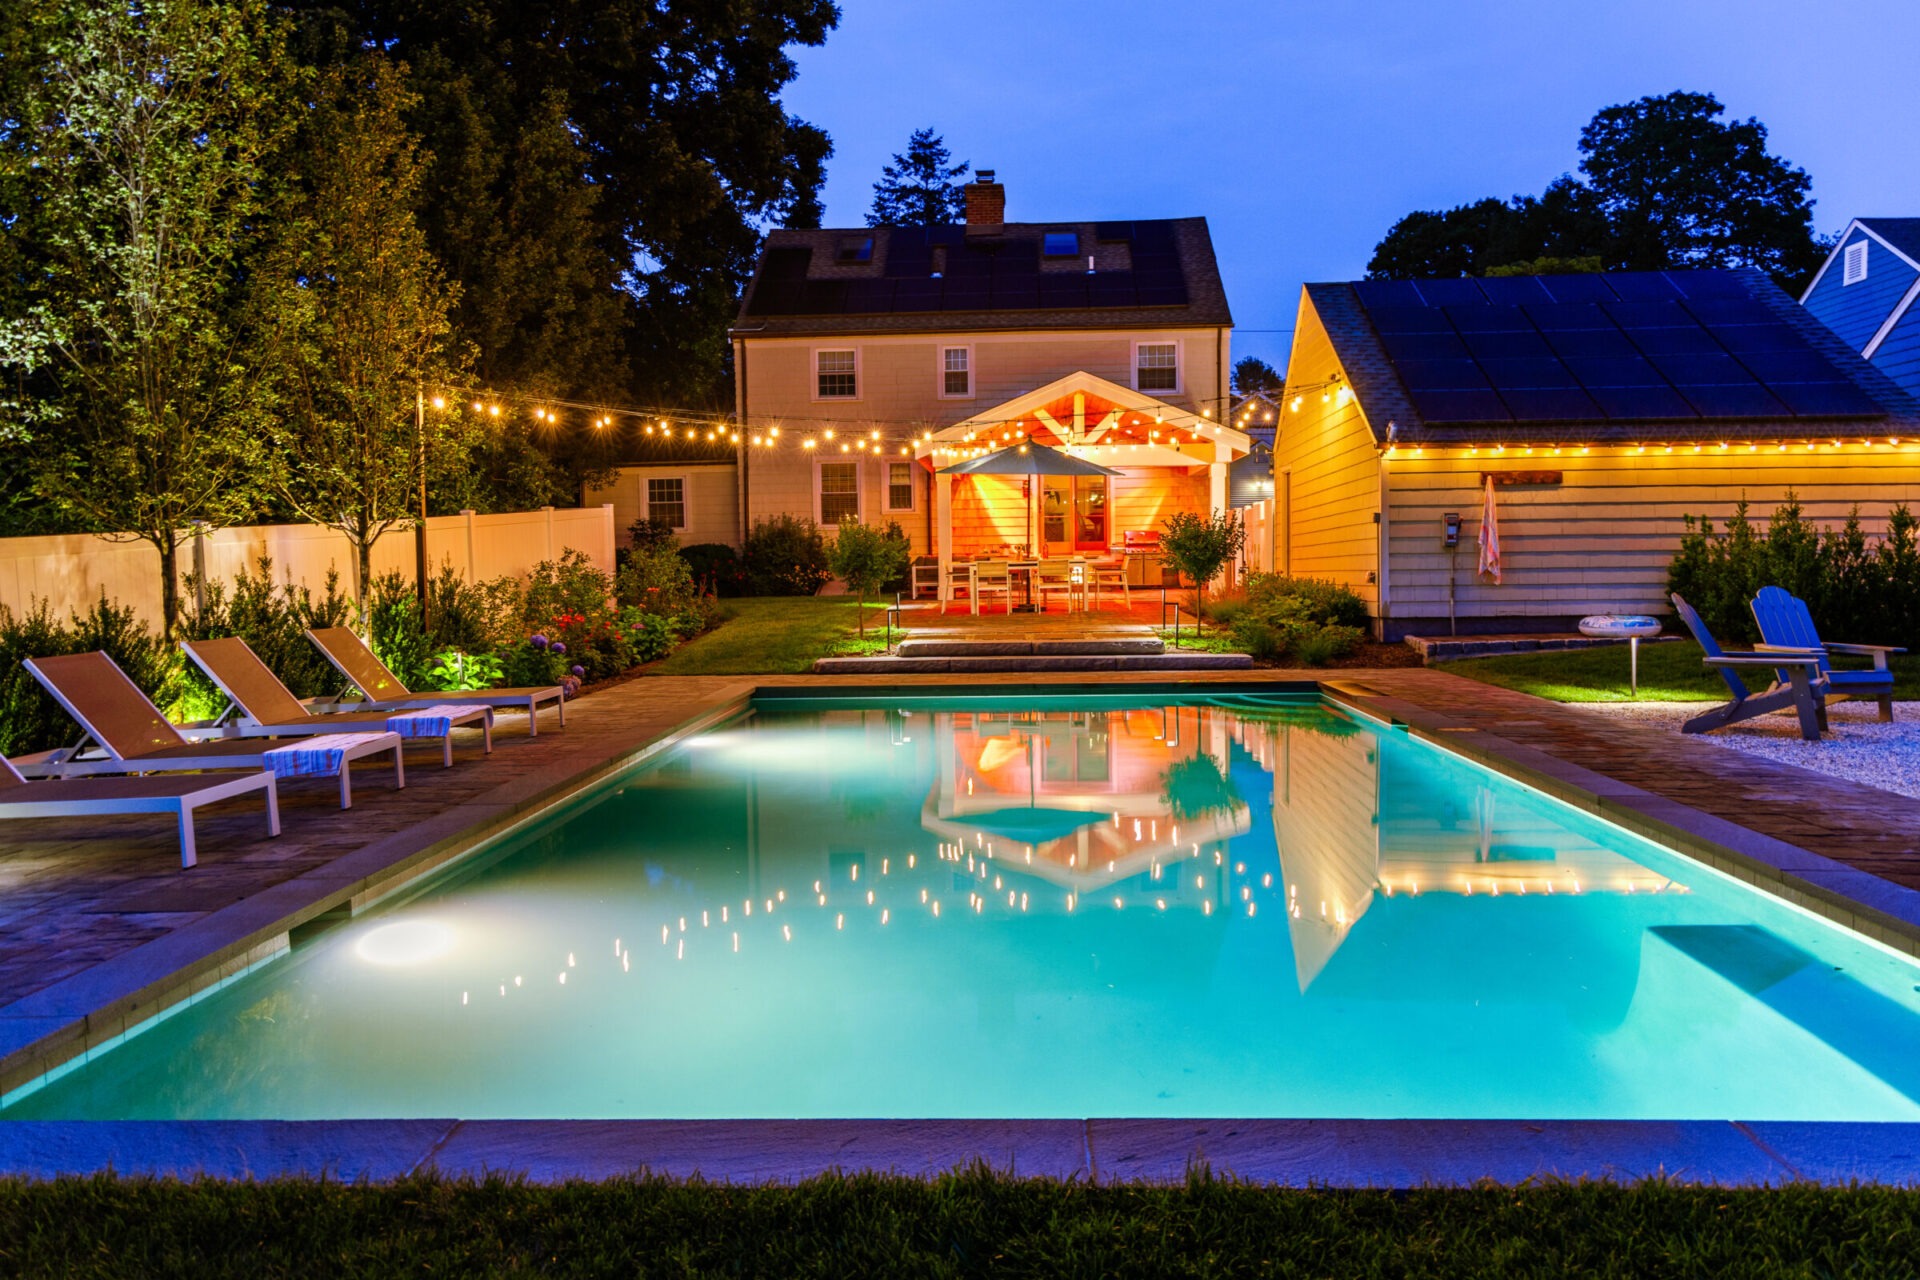 A tranquil evening setting featuring an illuminated swimming pool, string lights, loungers, and a house with a patio canopy. The environment is serene and inviting.